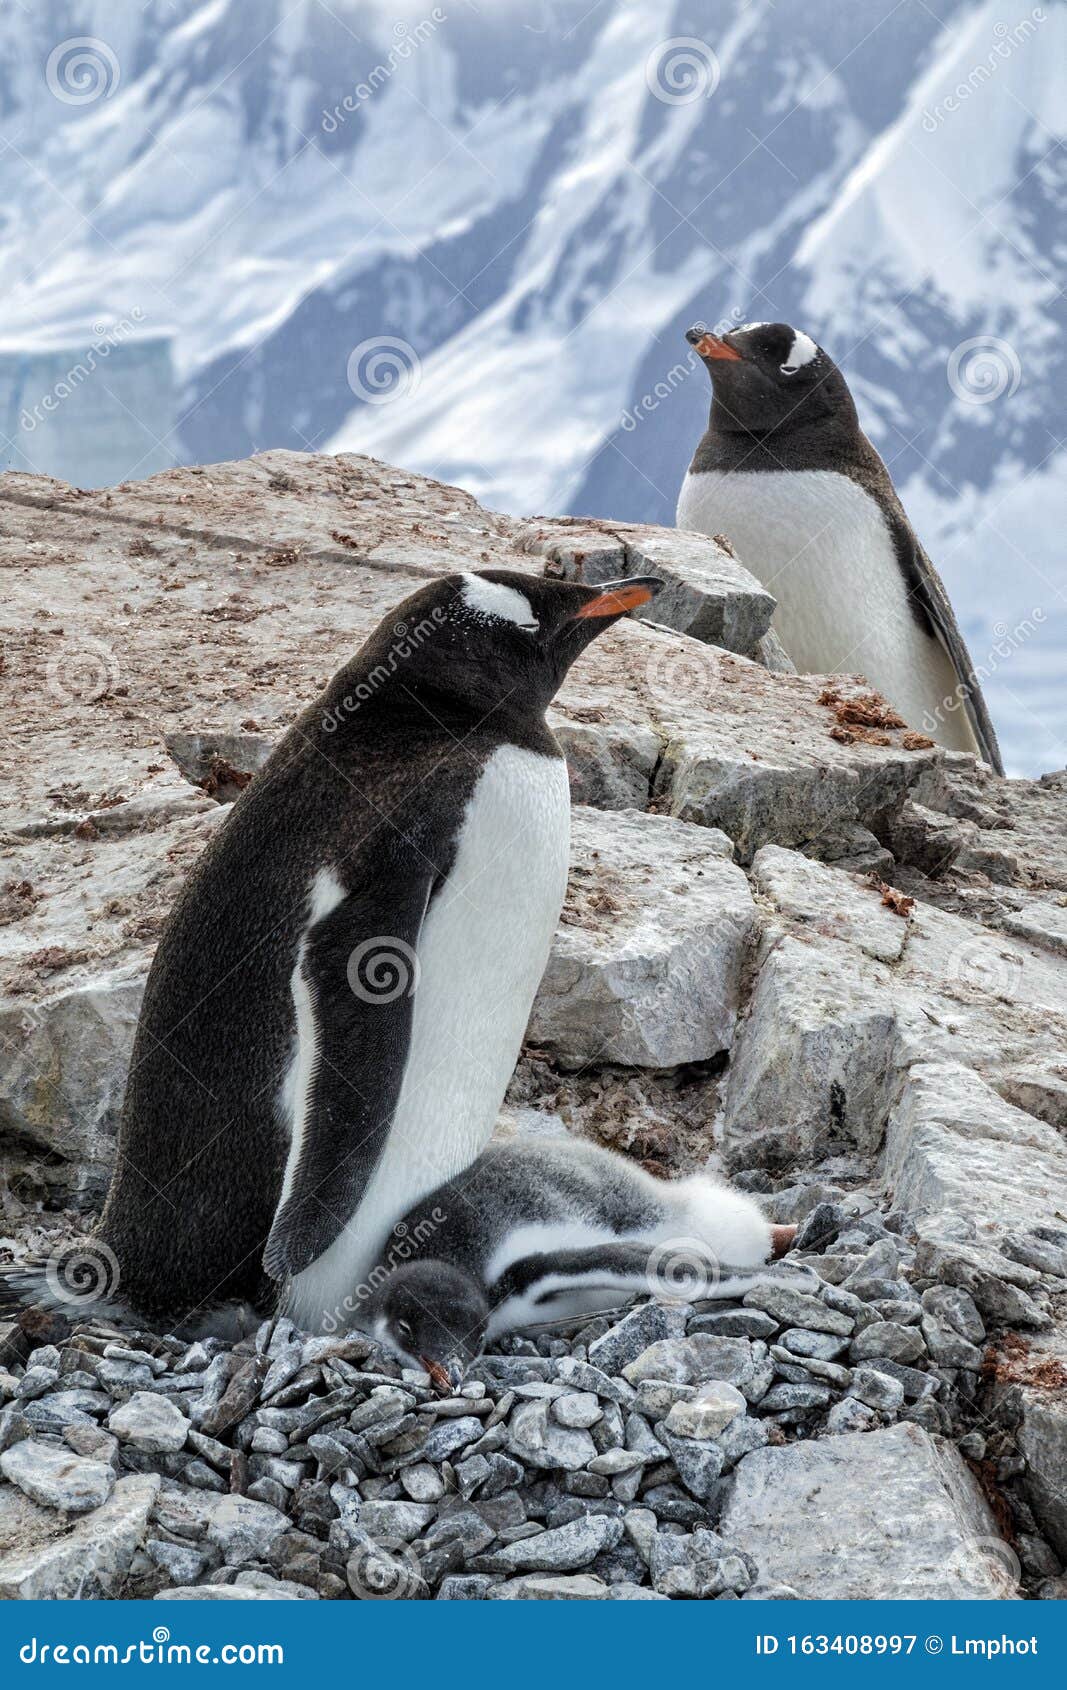 gentoo parents and chick on rocky outcropping